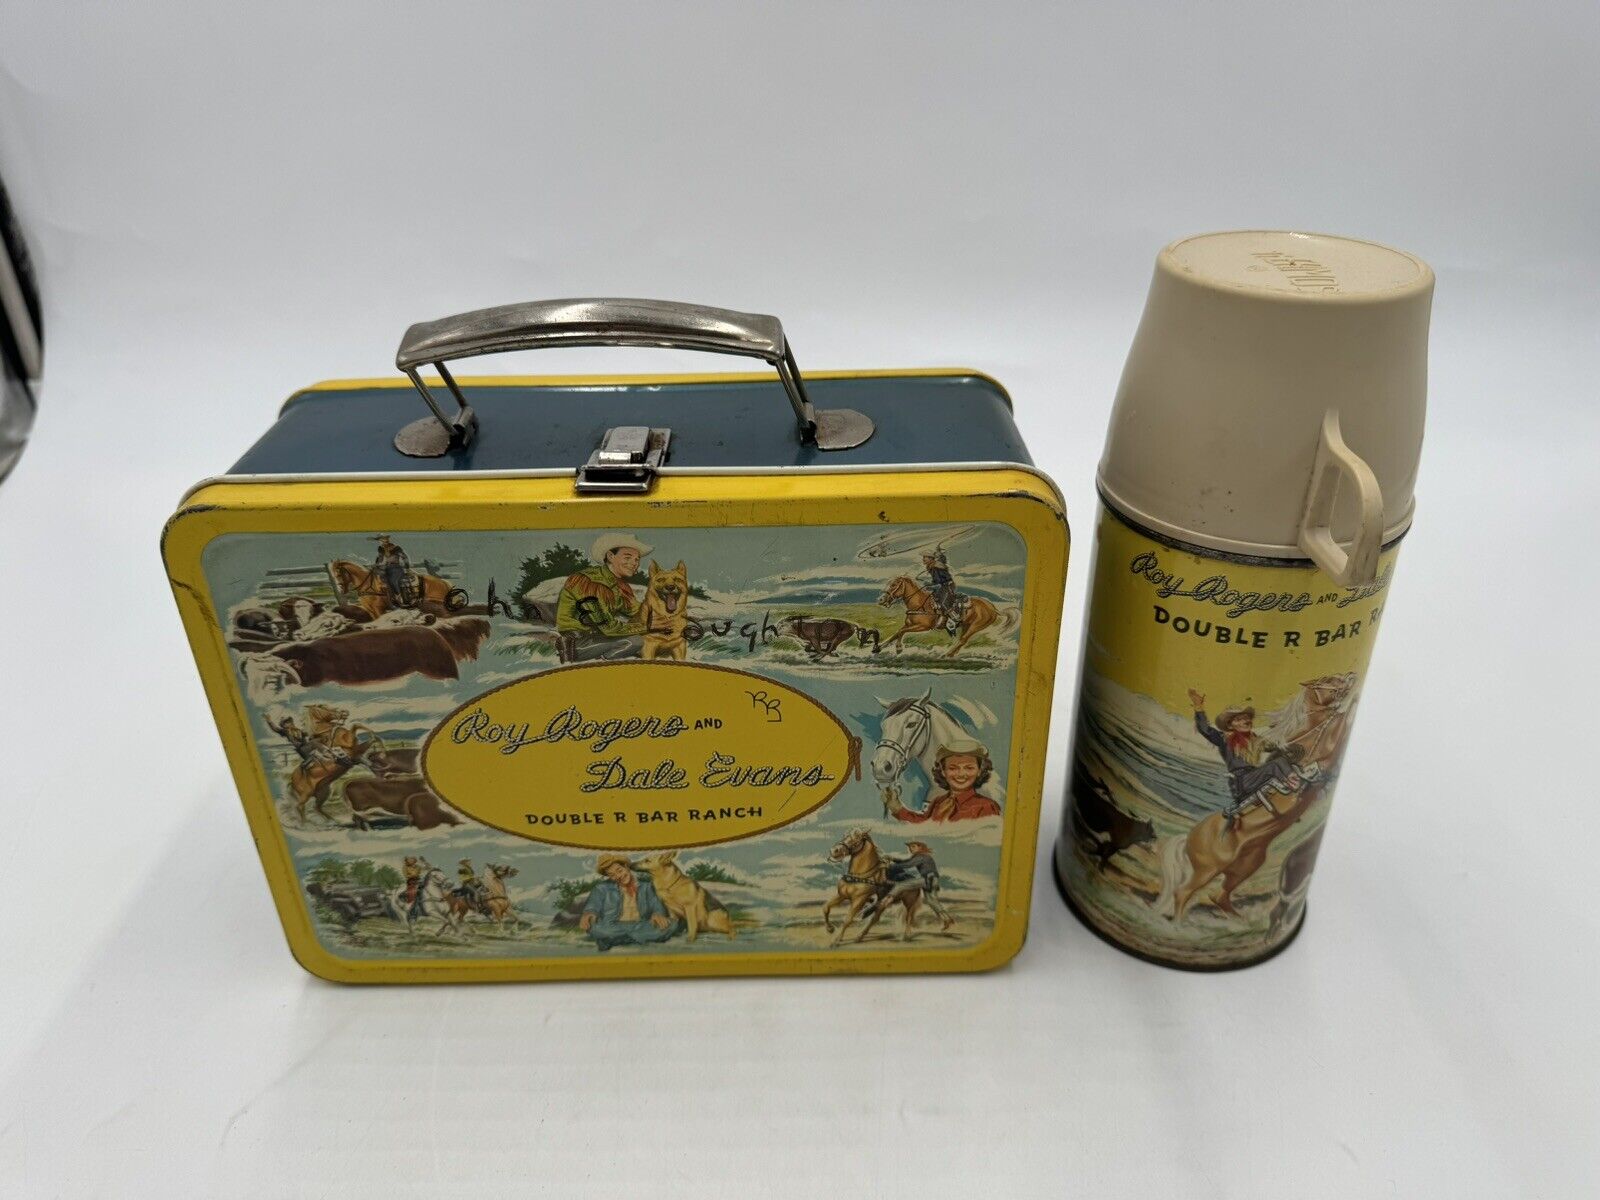 VTG Roy Rogers and Dale Evans Double R Bar Ranch Lunchbox + Thermos 1955